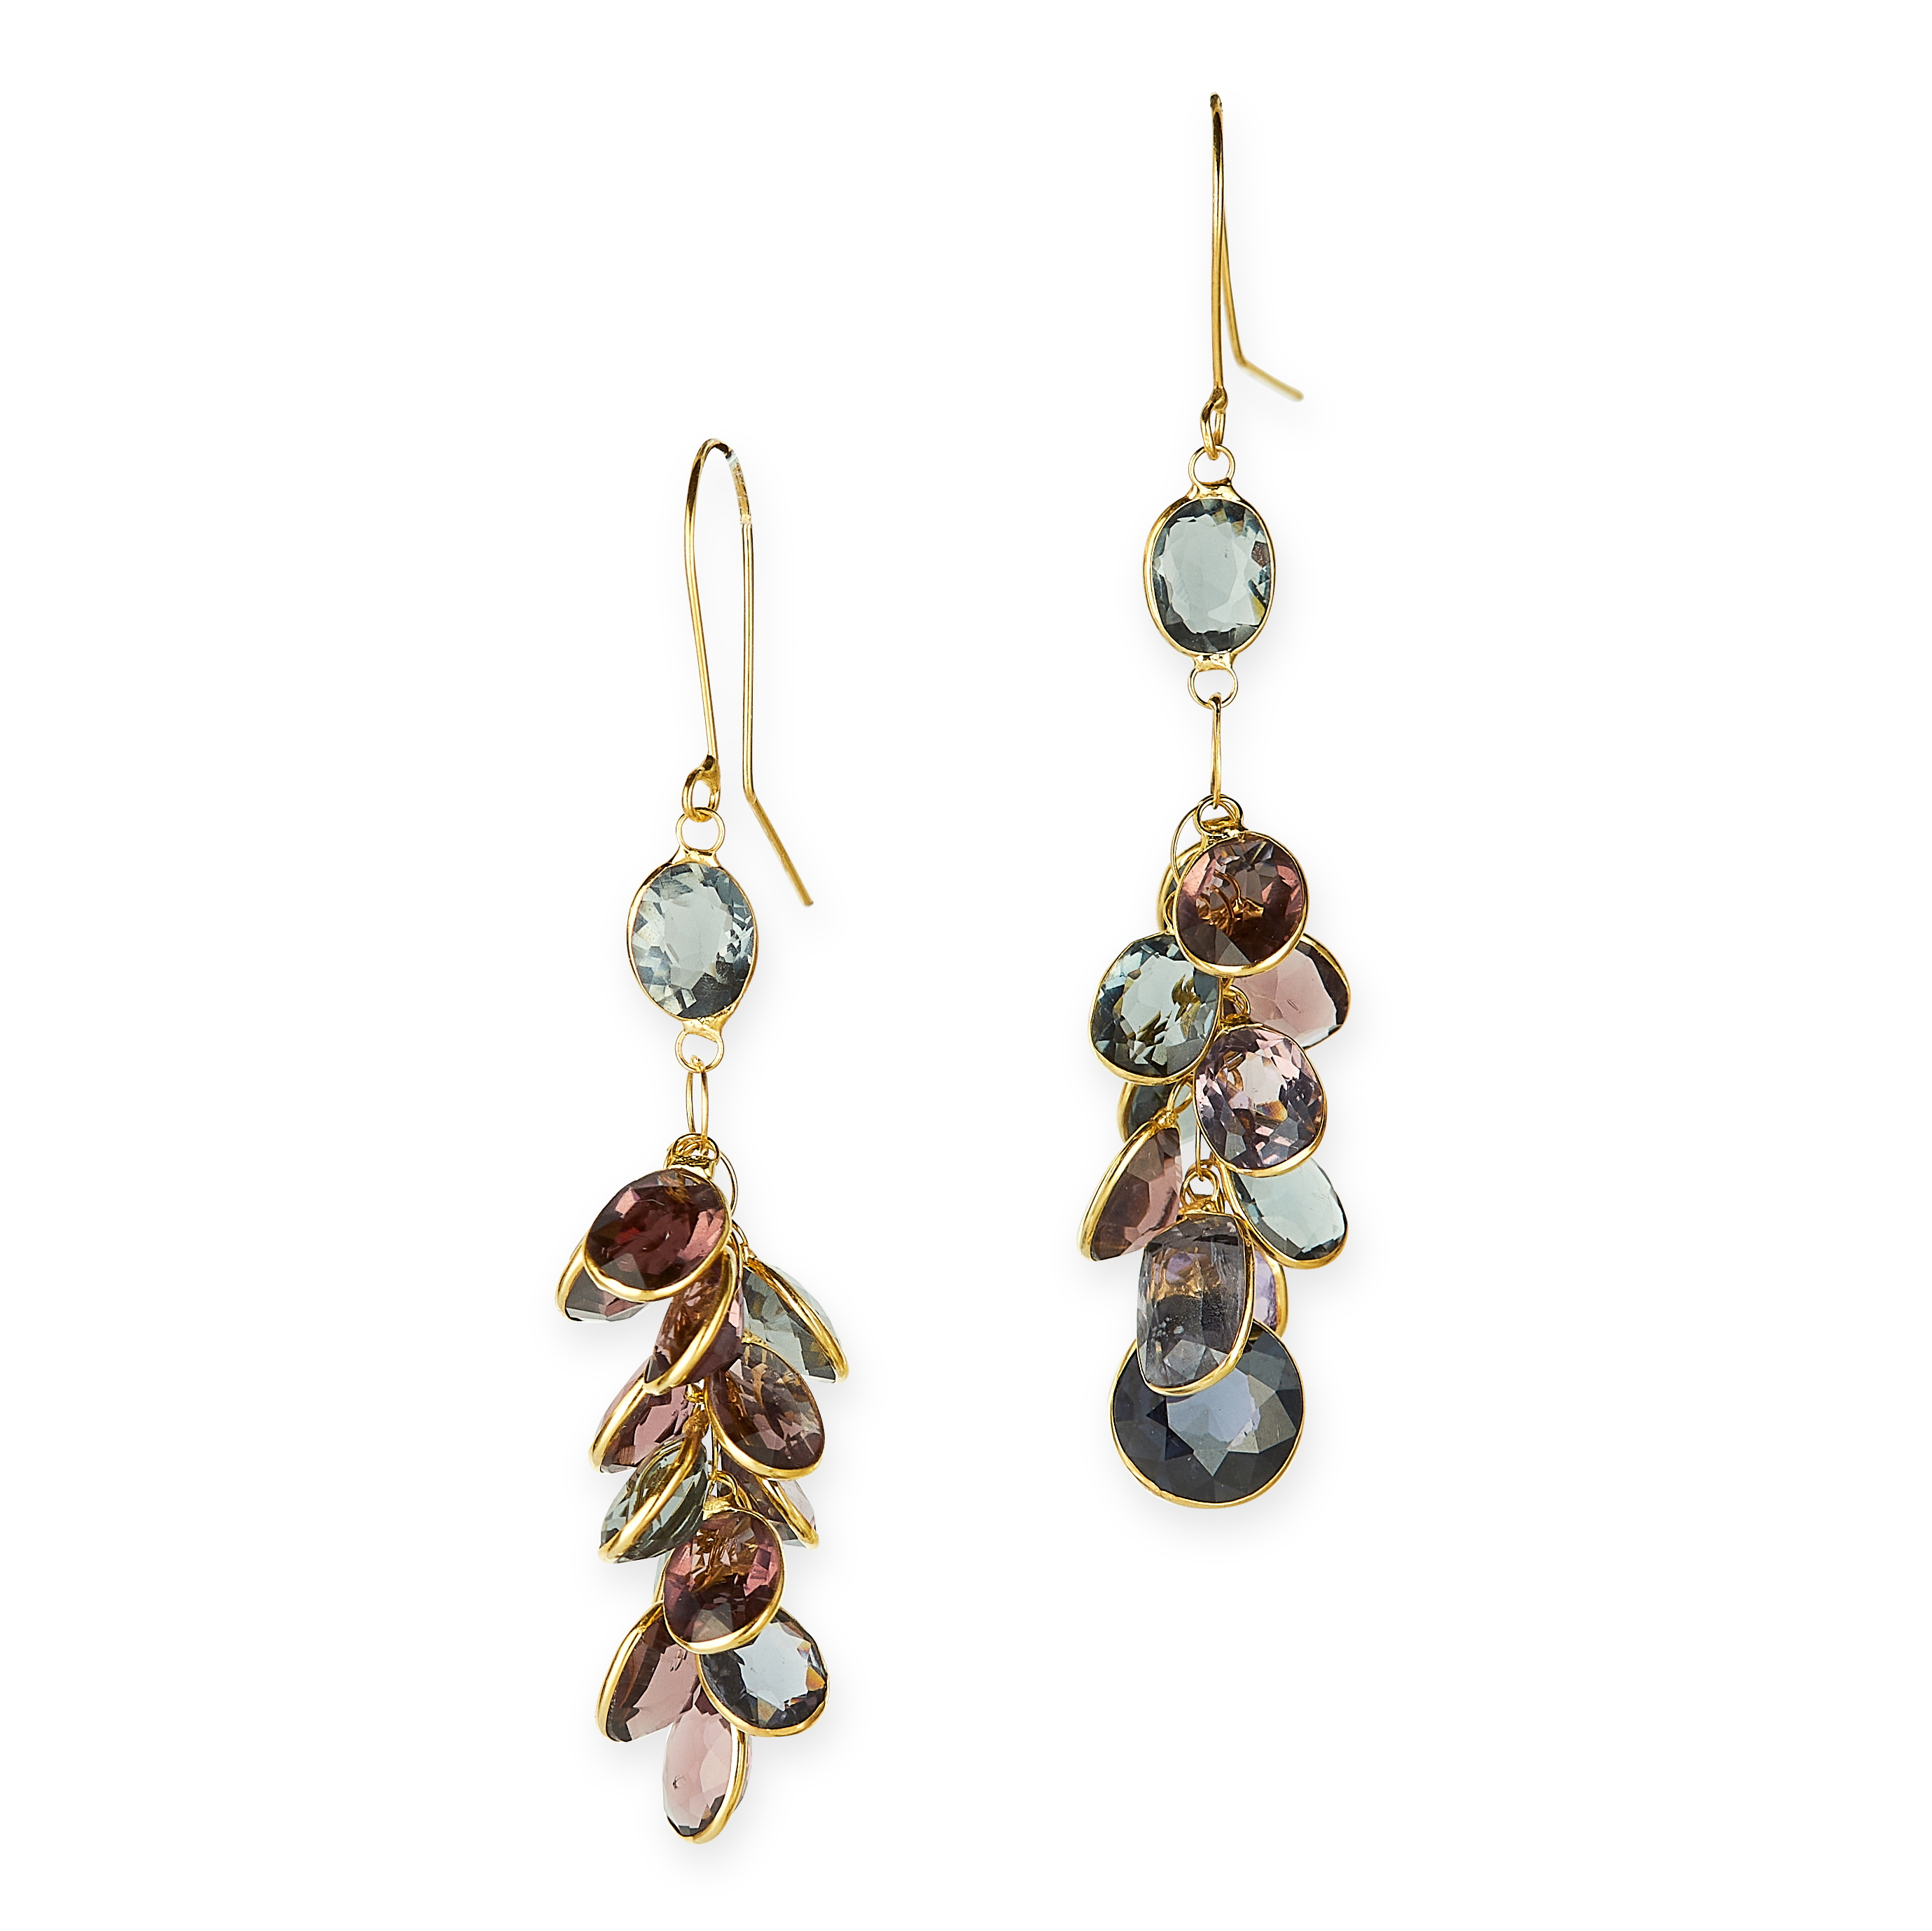 A PAIR OF TOURMALINE, AMETHYST AND SAPPHIRE EARRINGS in yellow gold, each formed of a cluster of